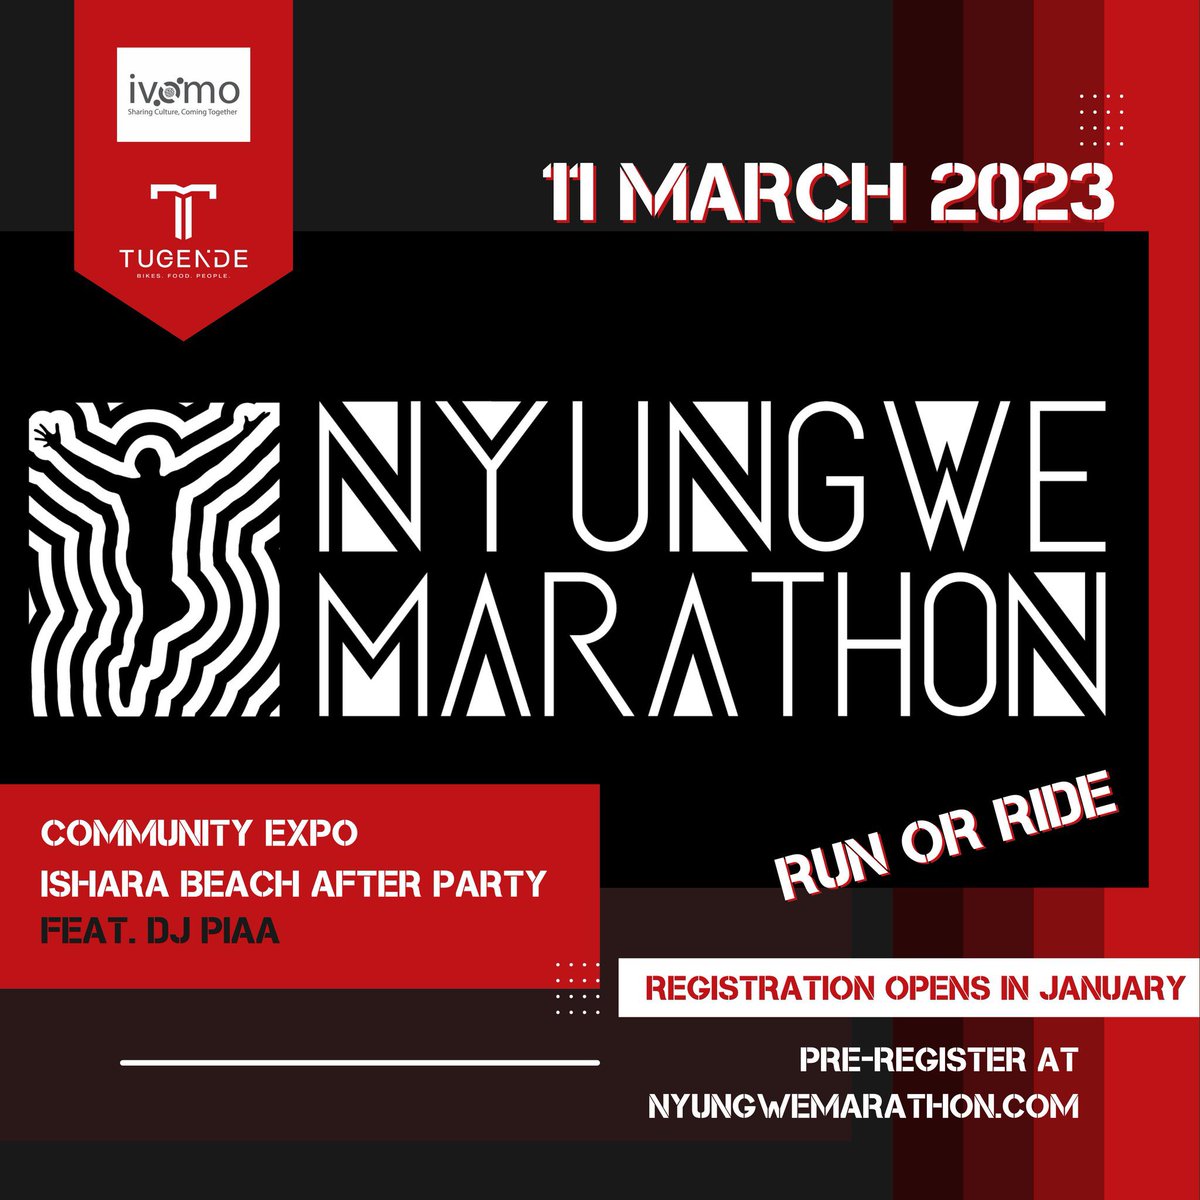 You can run, ride, or do both this year! I will be ready to entertain you at the finish line and in the after party at ISHARA BEACH 🔥🔥🔥 Pre-register at nyungwemarathon.com